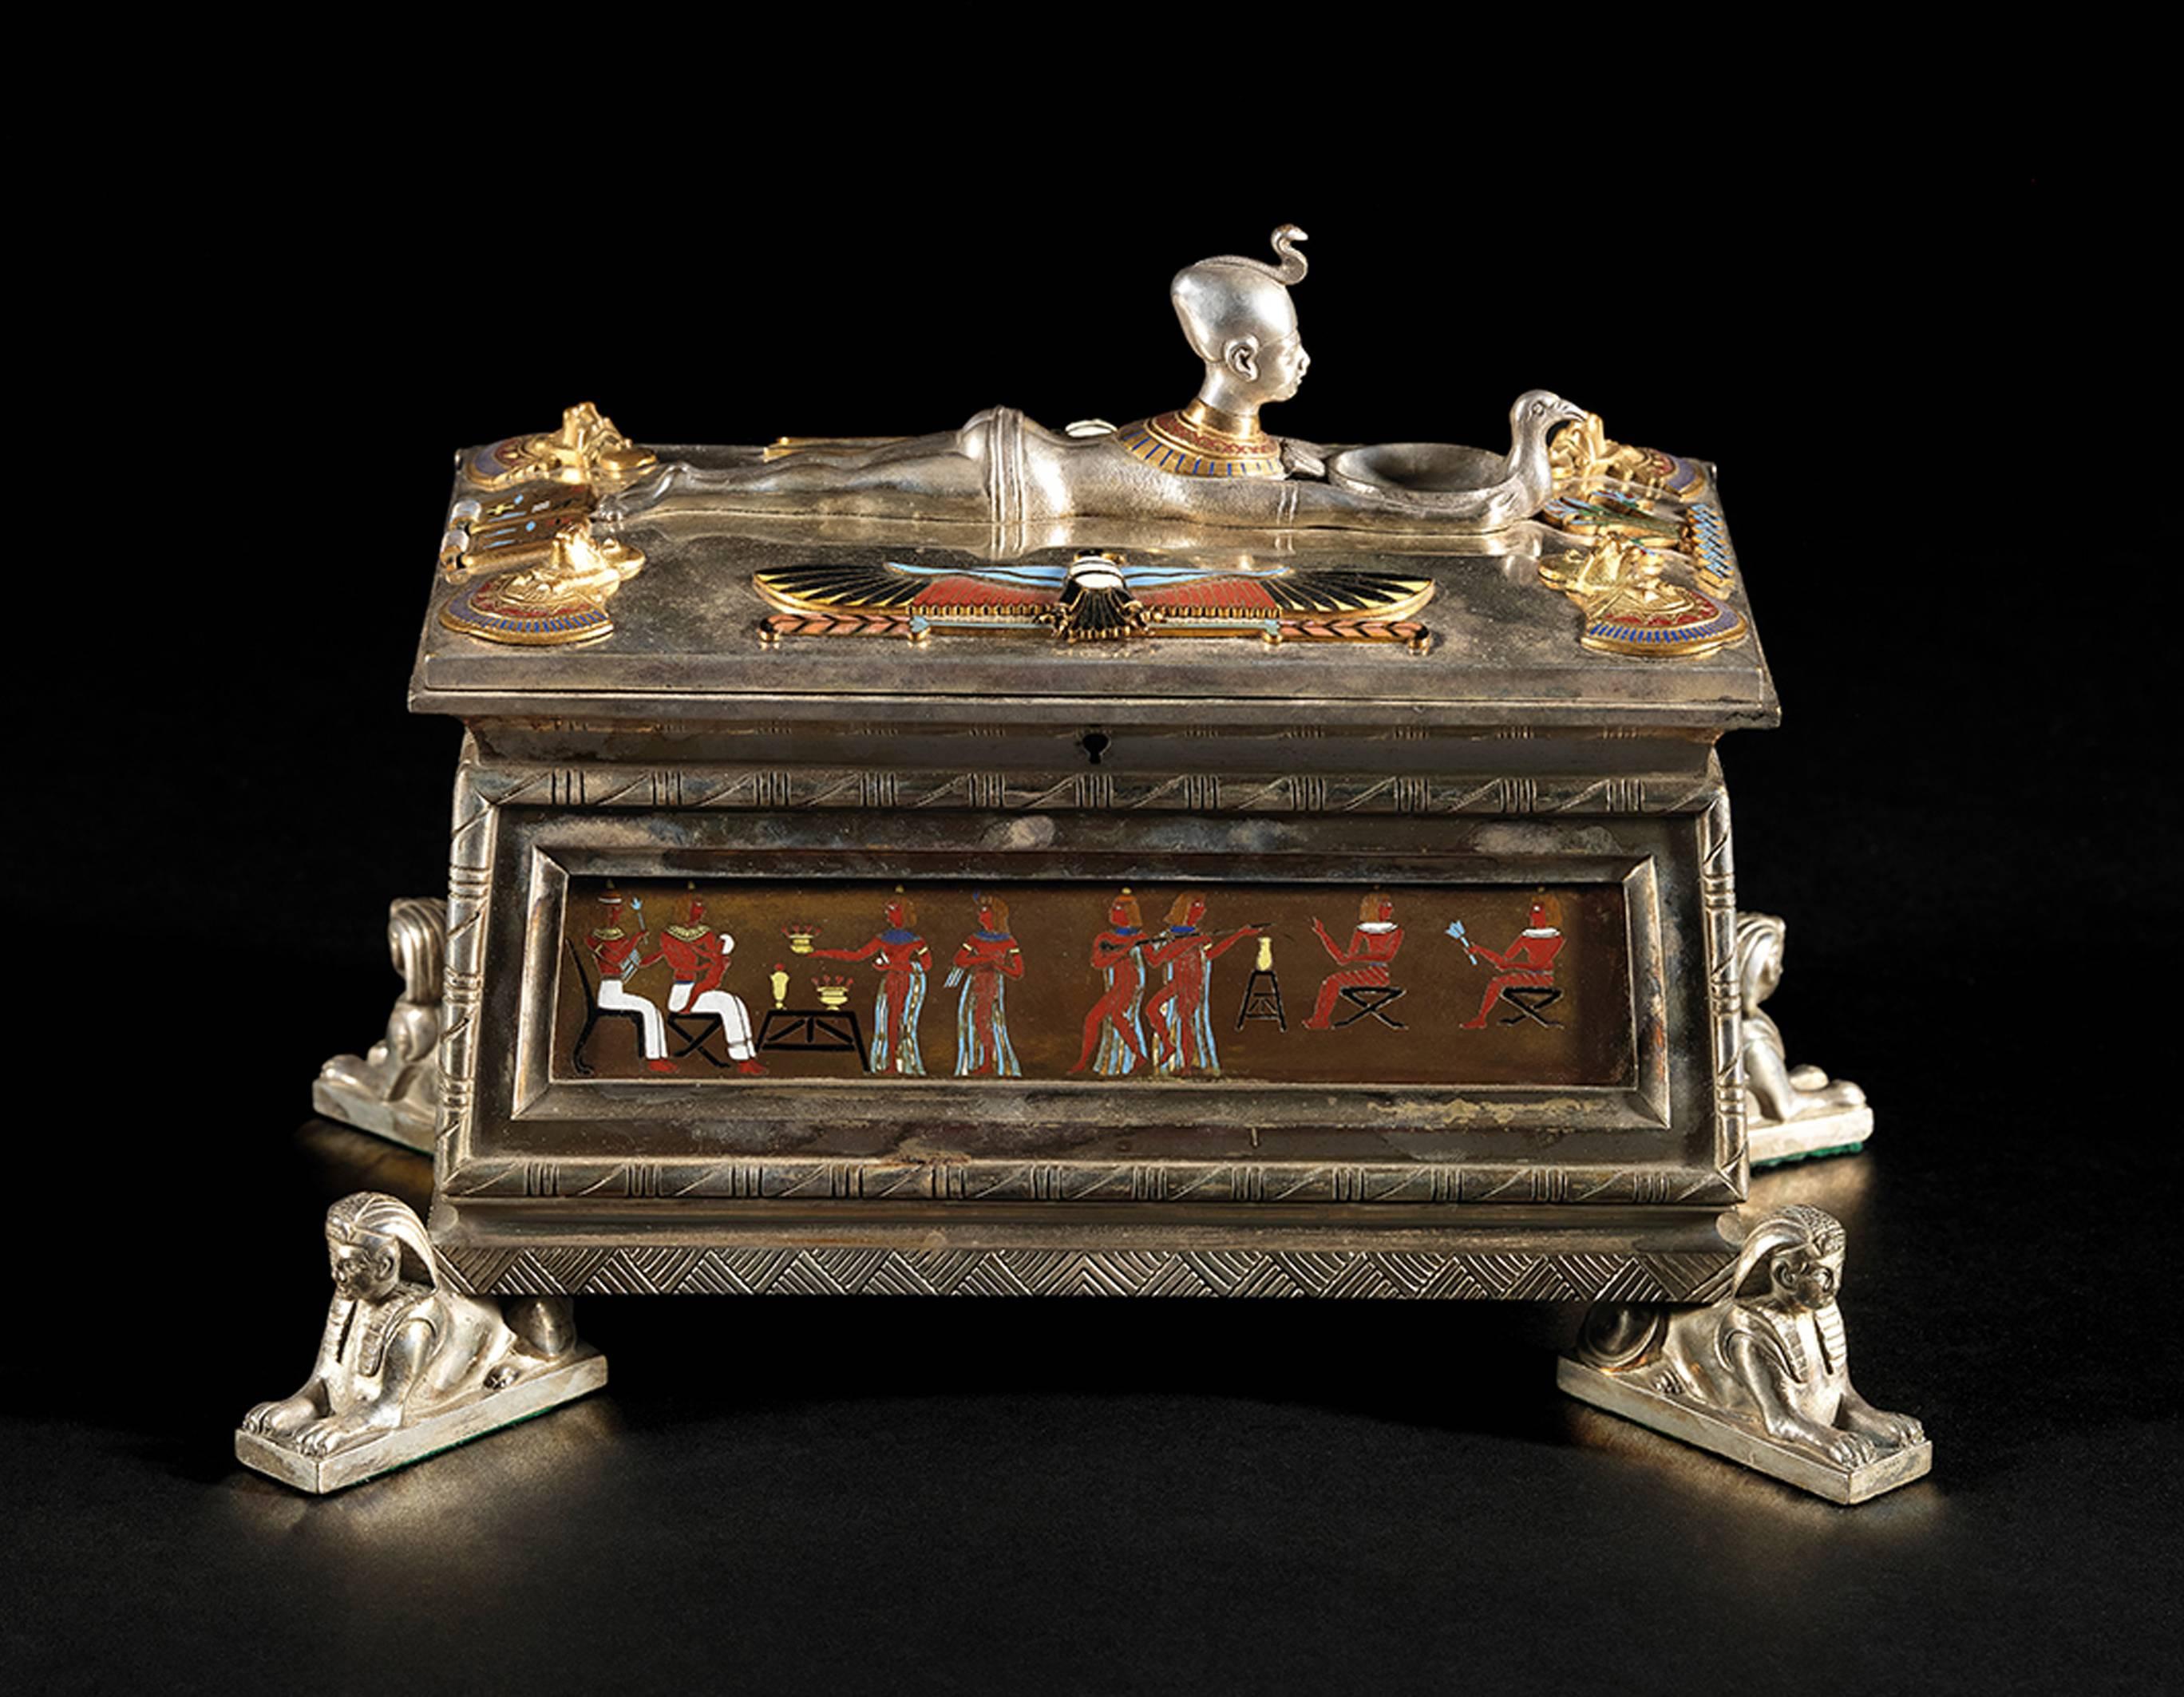 French Egyptian Revival Silvered and Gilt Metal Cloisonné Enamel Casket, circa 1867 For Sale